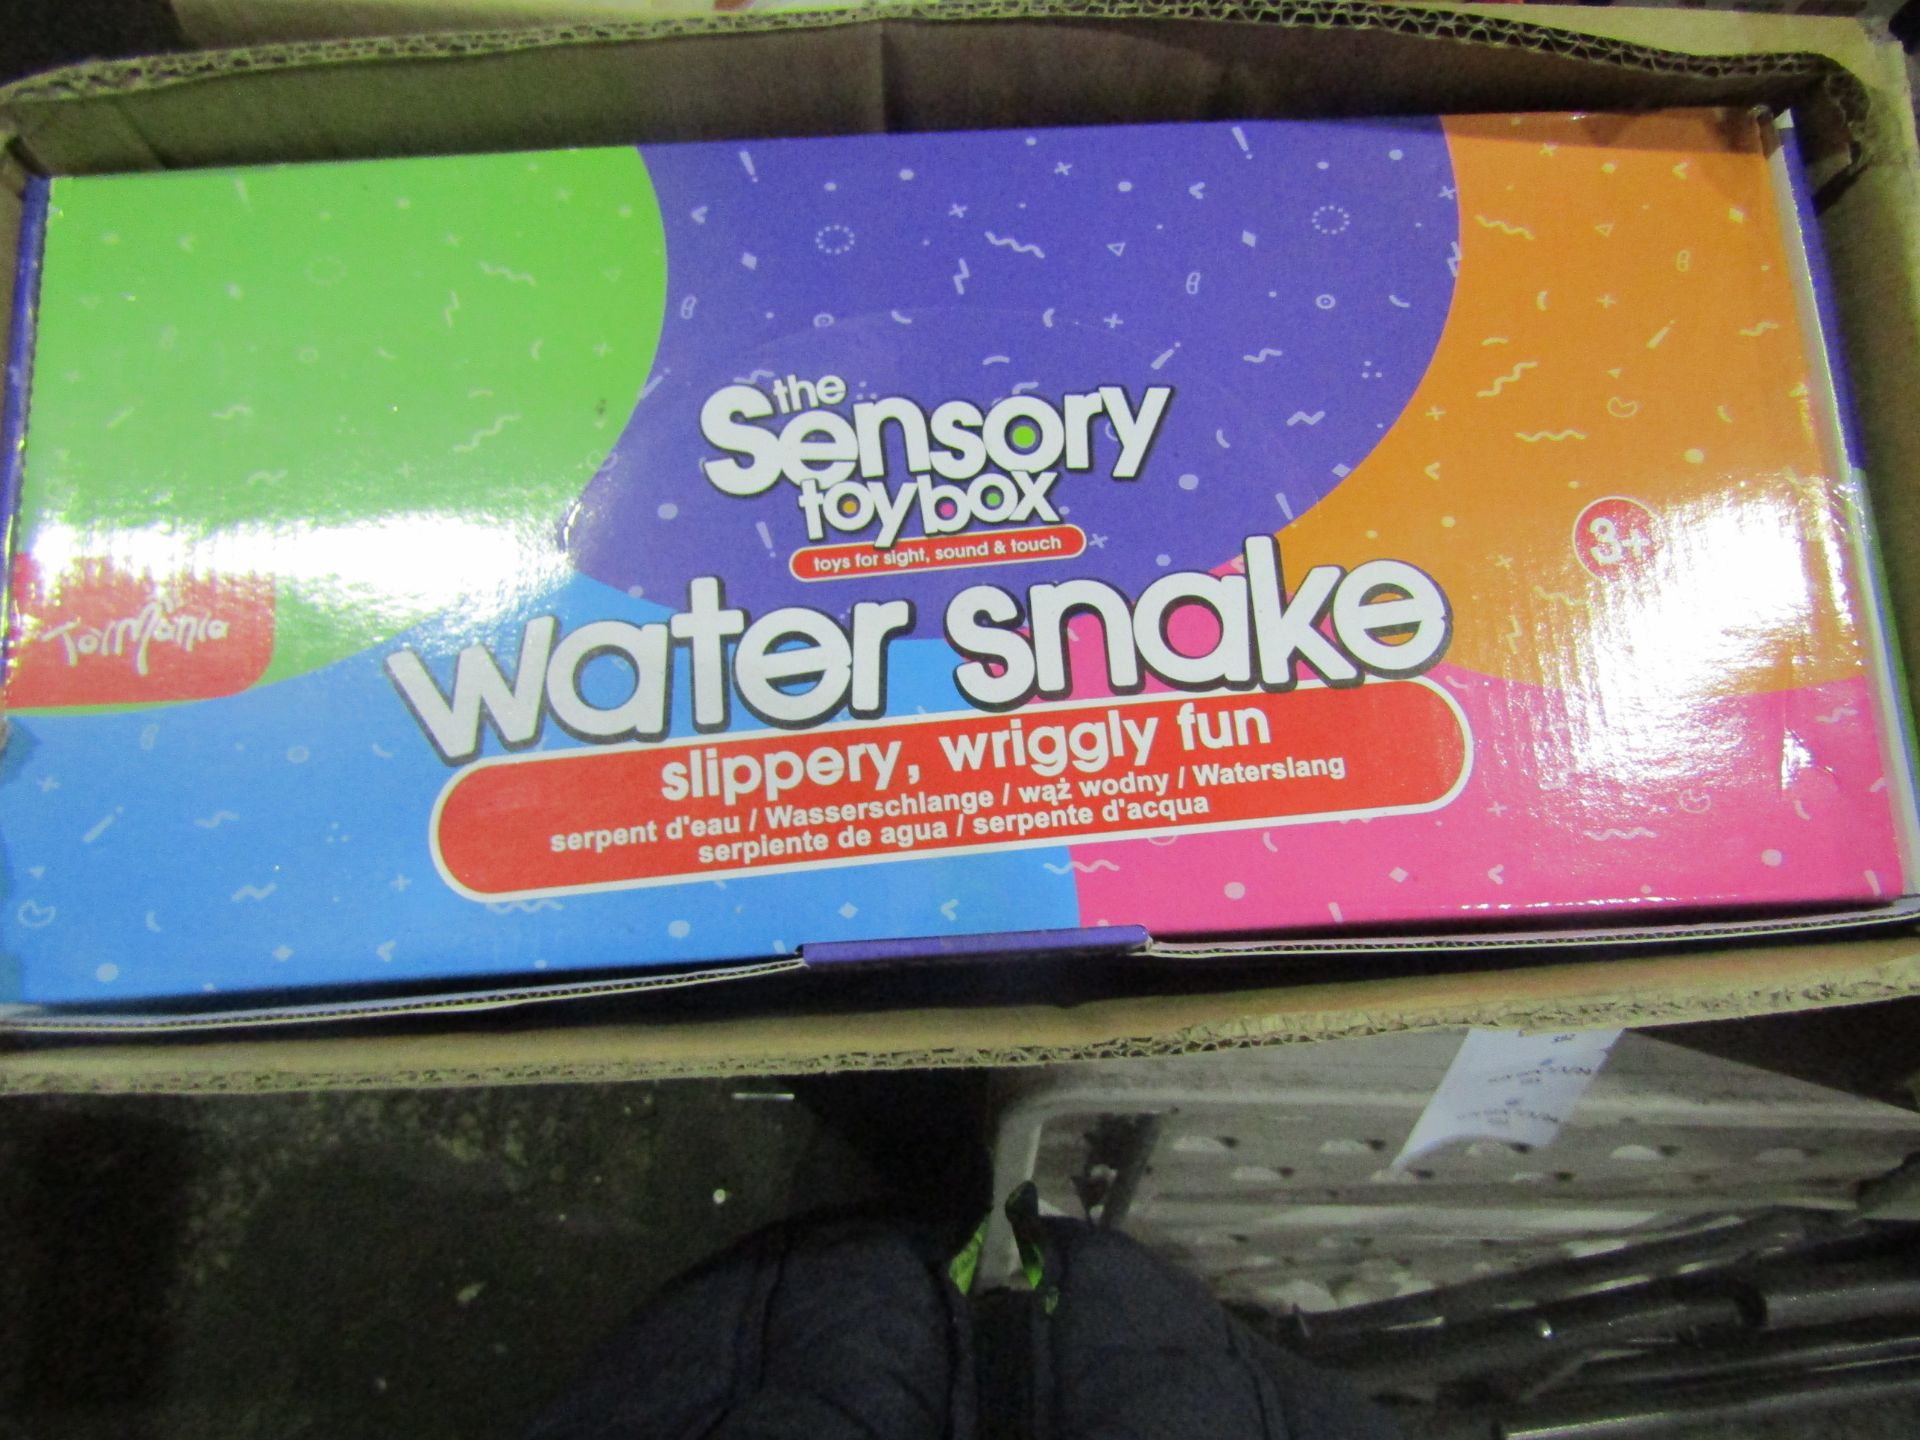 Box of 6 Sensory Water Snakes Unchecked & Boxed